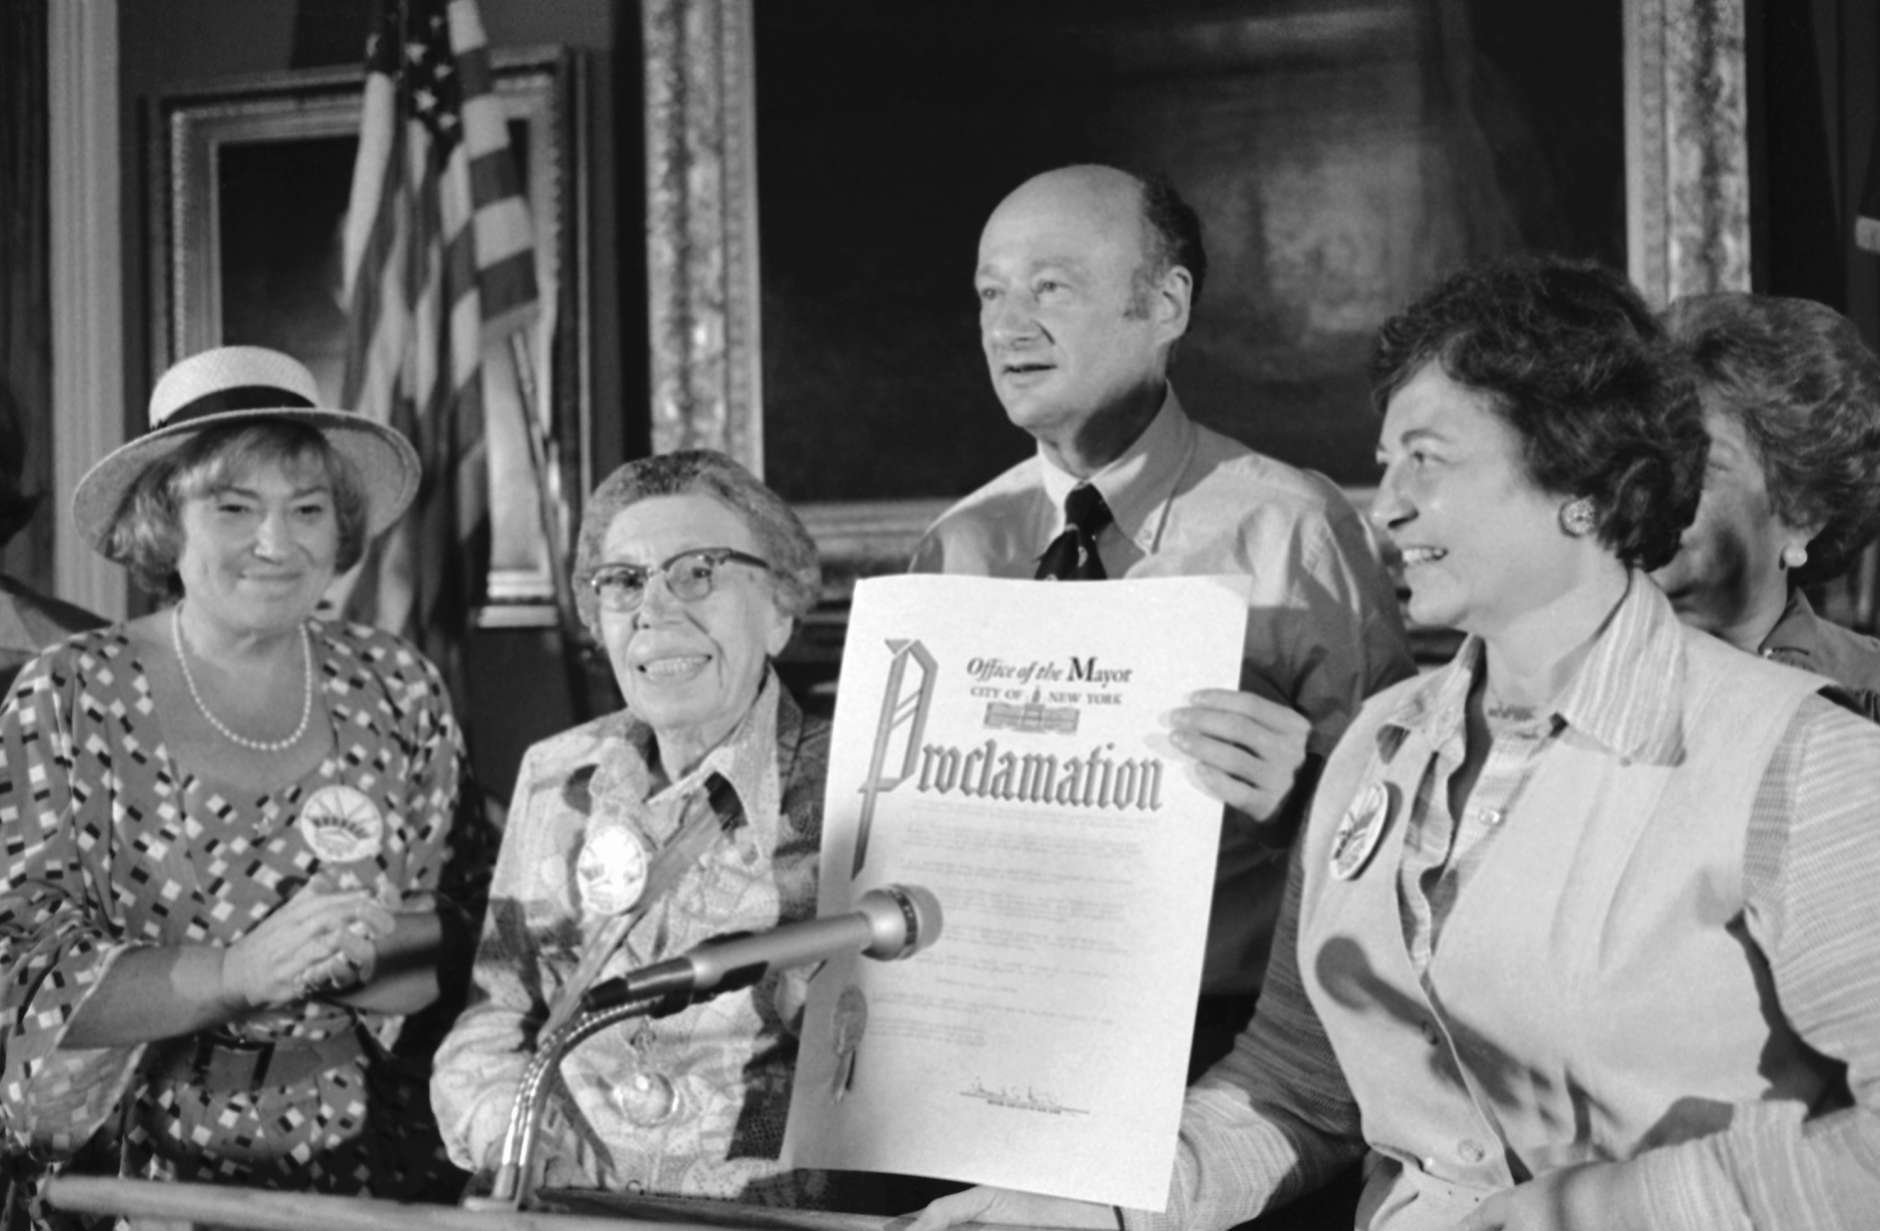 Mayor Ed Koch of New York City holds a proclamation for "Women's Equality Week," at a City Hall ceremony, Monday, August 28, 1978 in New York, as former congresswoman Bella Abzug, left, suffragist Isola Reid Doric, 86; and Lt. Gov. Mary Anne Krupsak, right, look on. Doric joined the suffrage movement in 1913 and accepted the proclamations celebrating the 58th anniversary of suffrage. (AP Photo/Pickoff)